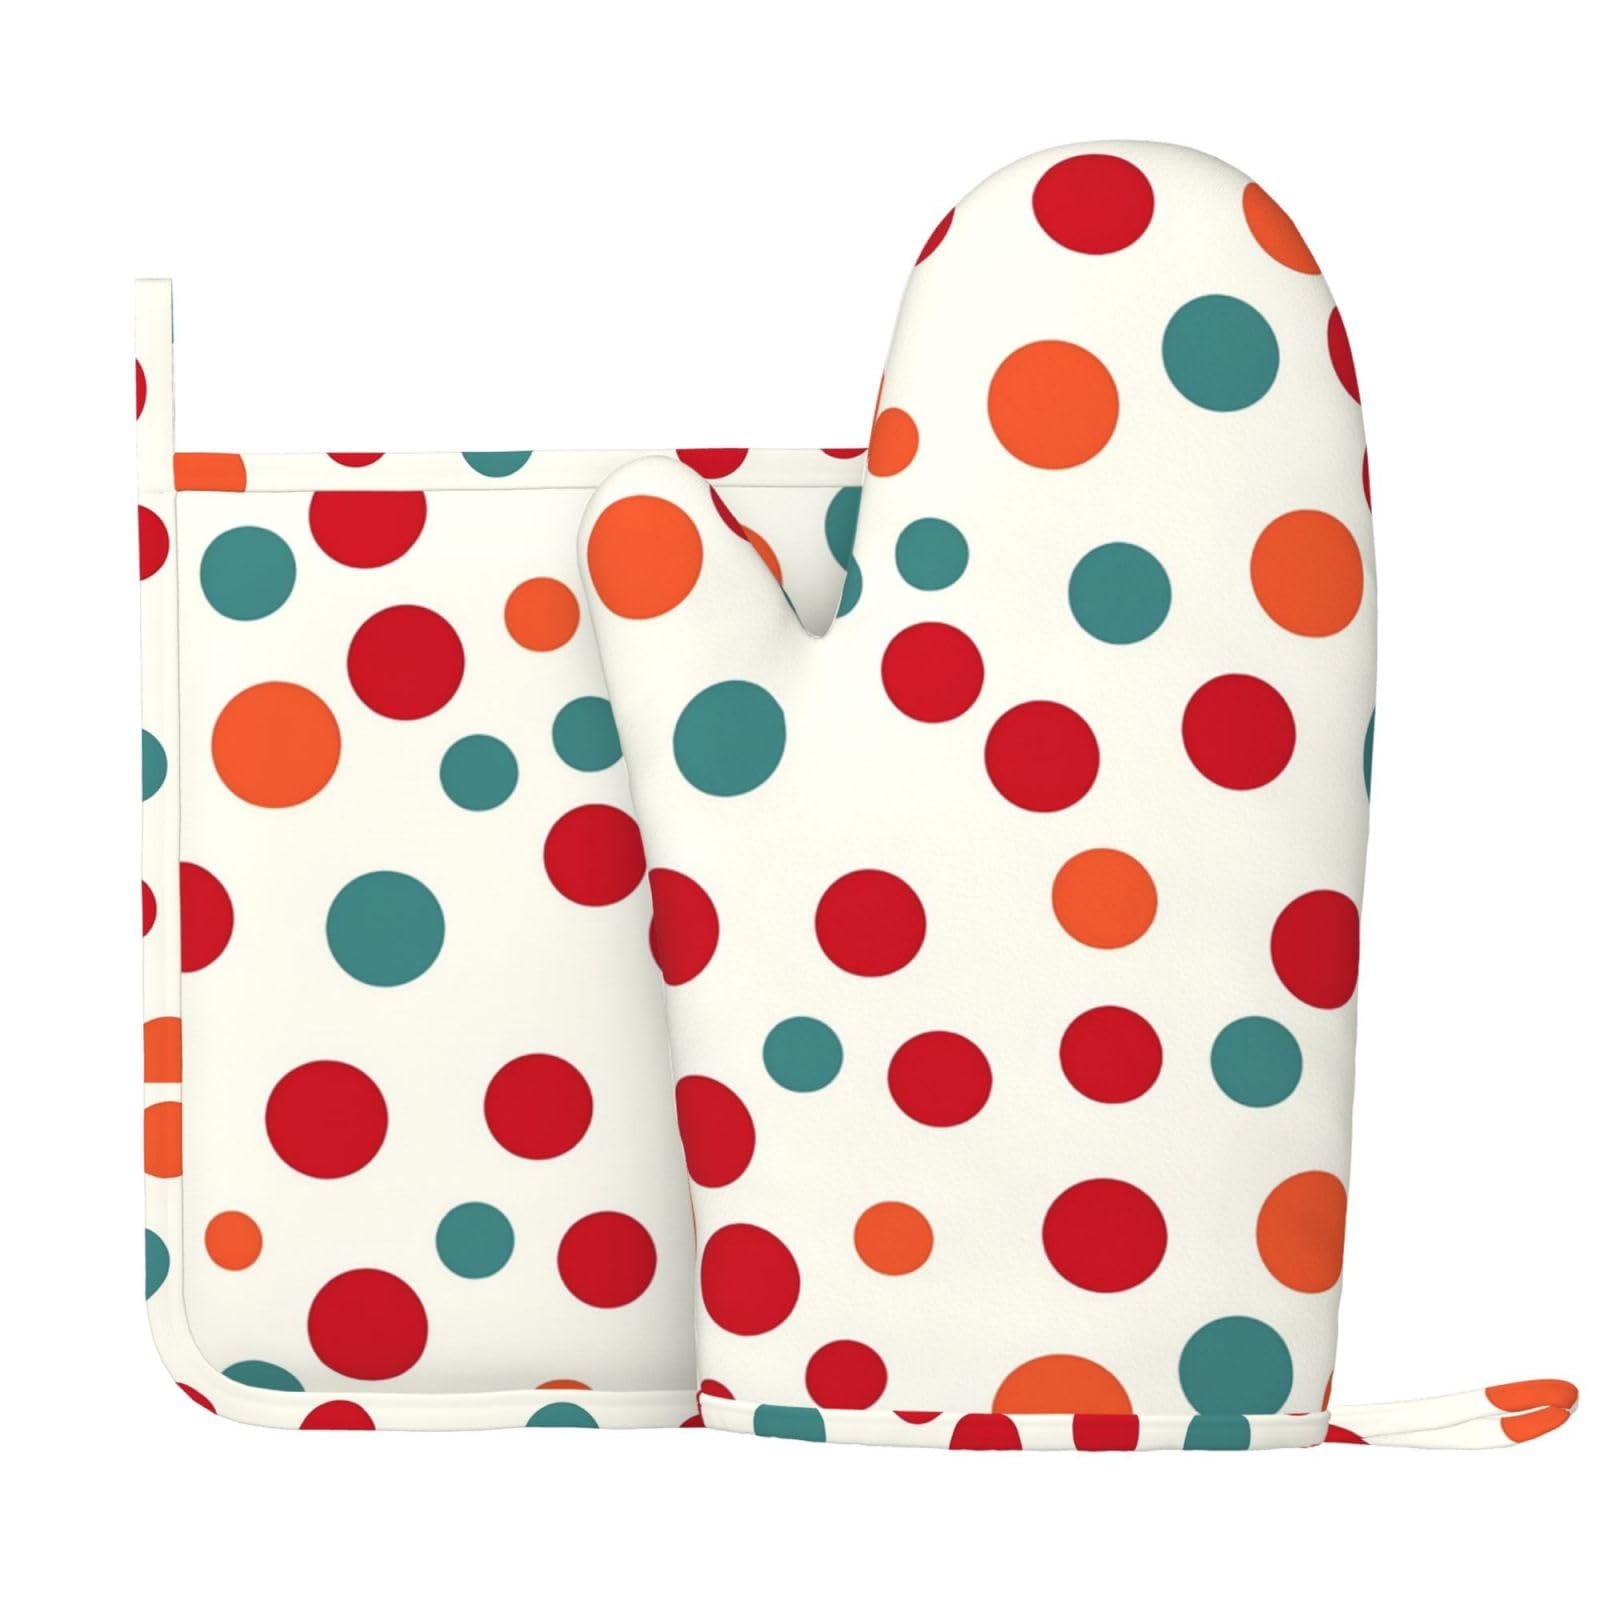 Polka Dot Printed Oven Mitts and Pot Holders Sets Heat Resistant Kitchen Oven Gloves Potholders Set Extra Long Non-Slip Silicone Gloves for Cooking Baking BBQ